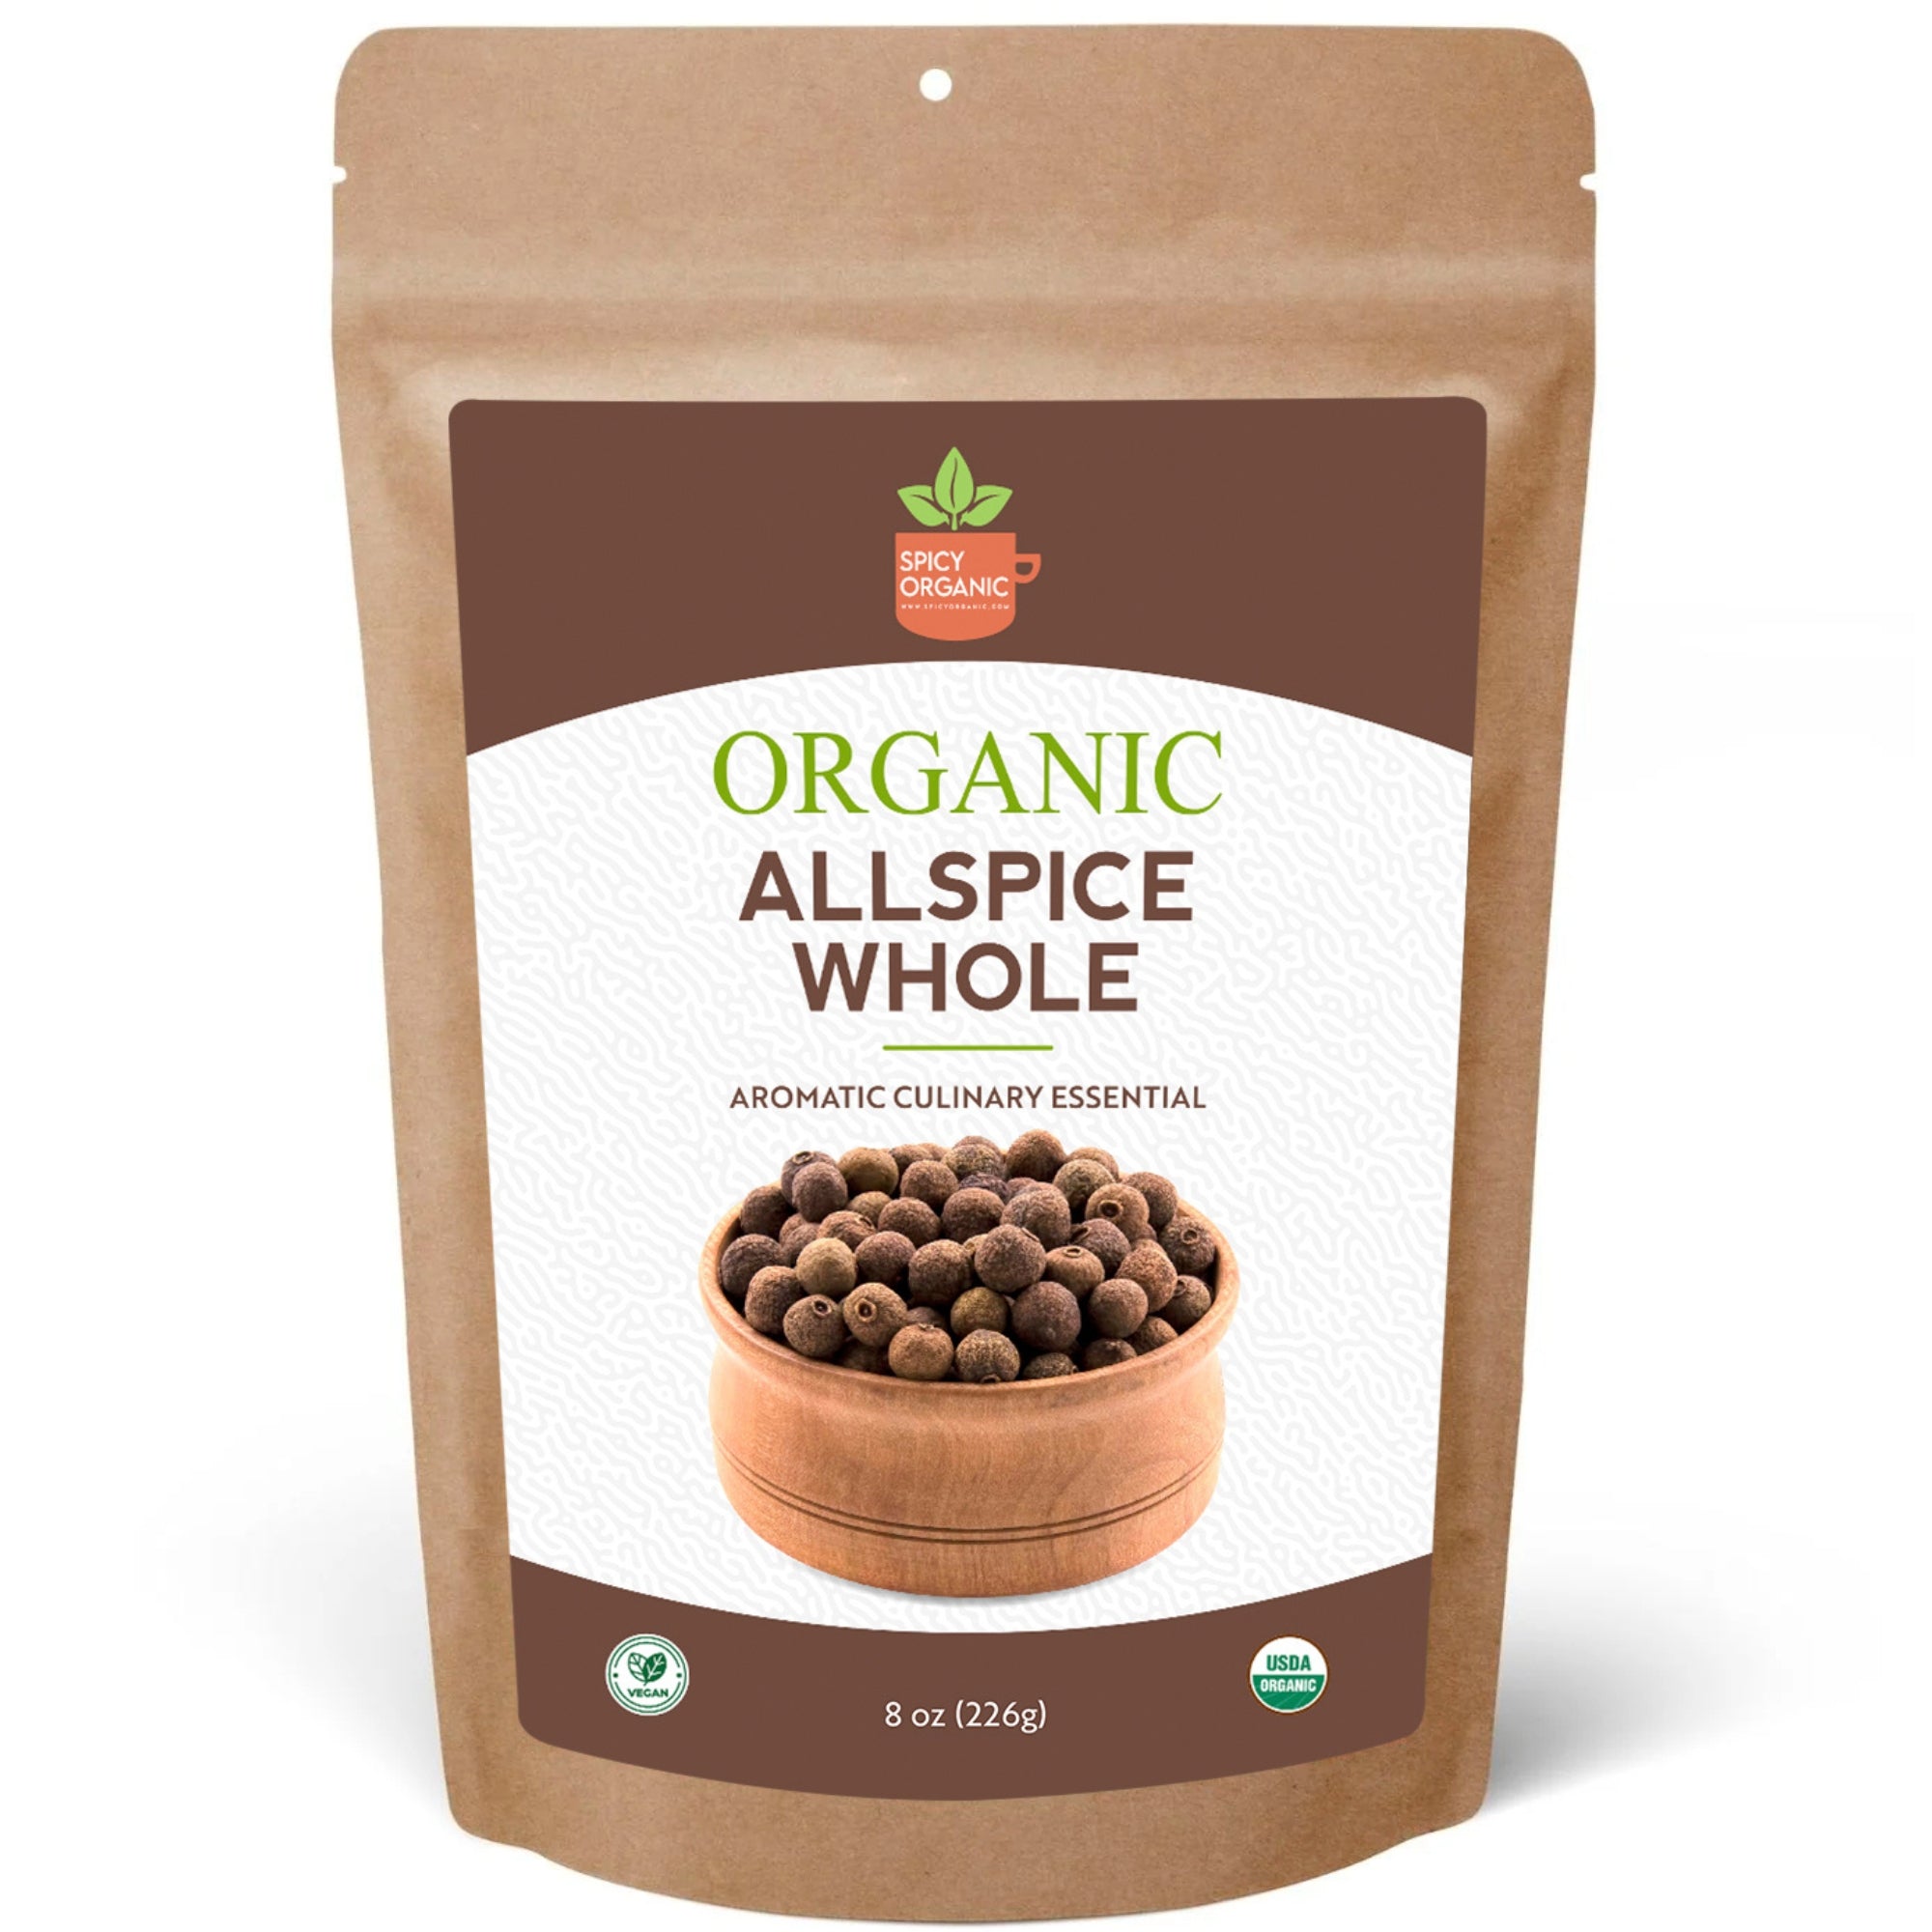 Organic Allspice Whole Berries- Certified USDA Organic- Allspice Seasoning for Baking, Marinades, Pickling, Stews, Sauces, and Beverages, Size: 8 oz.